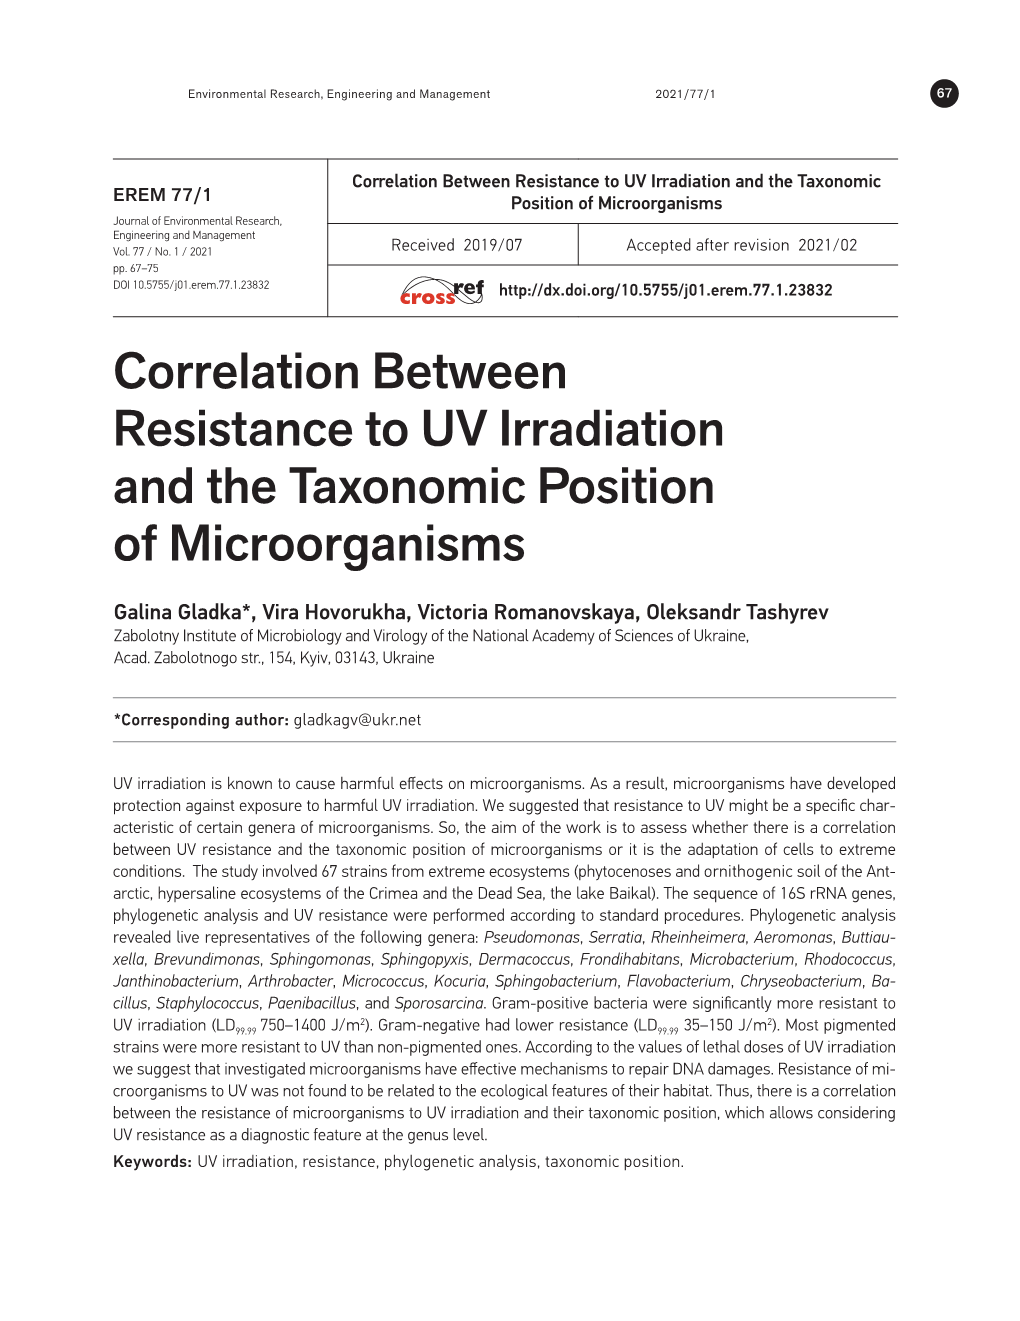 Correlation Between Resistance to UV Irradiation and the Taxonomic